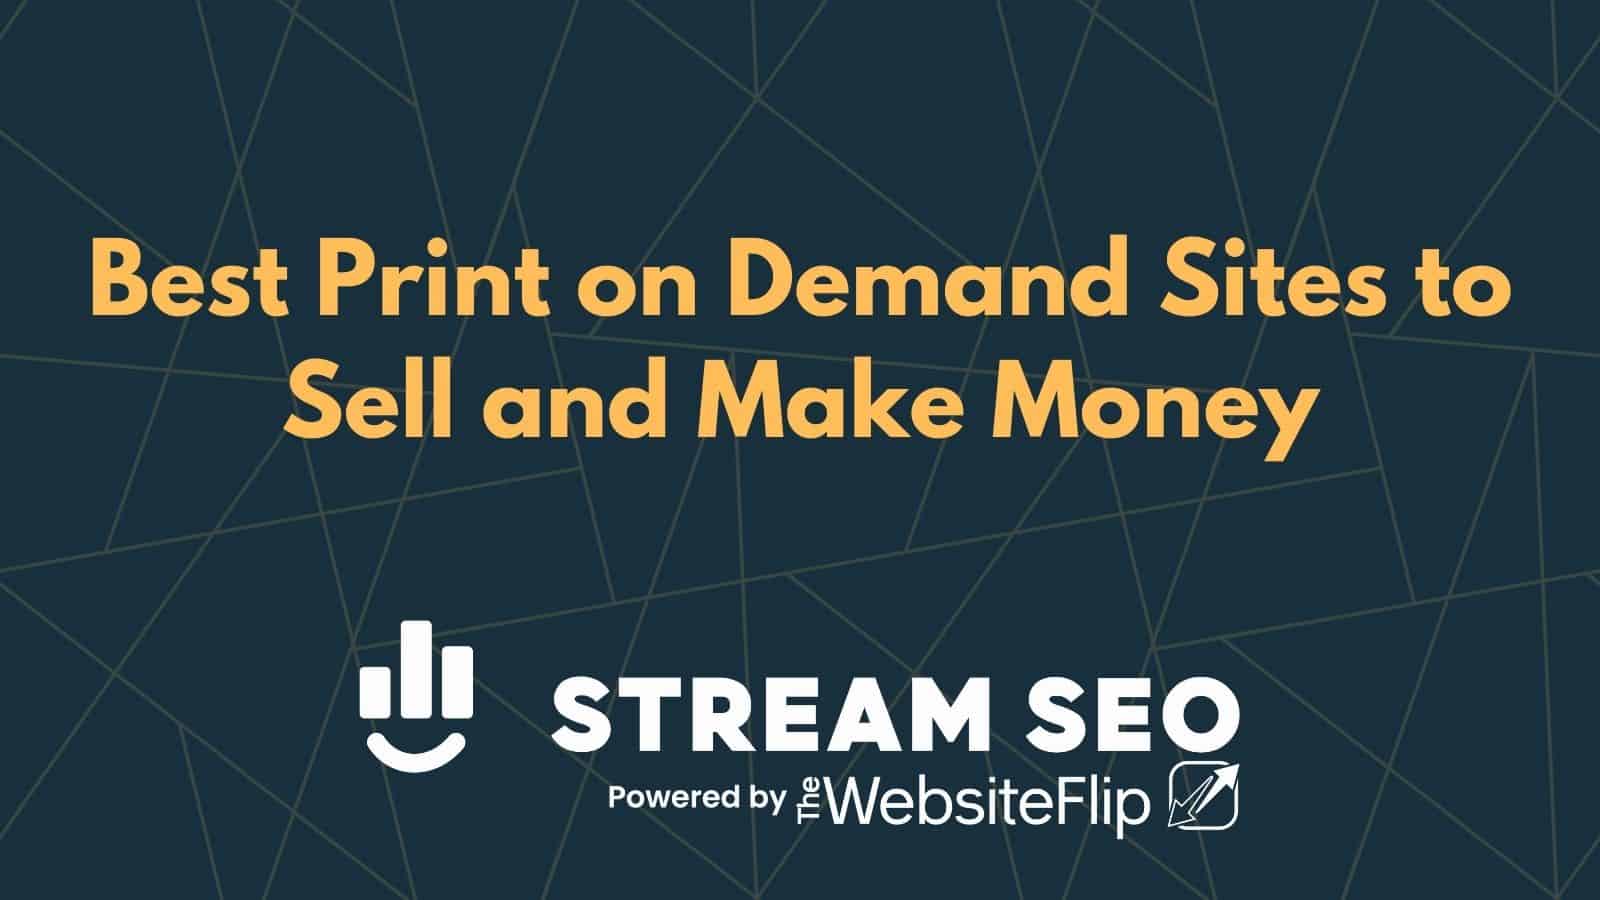 Best Print on Demand Sites to Sell and Make Money (2020)